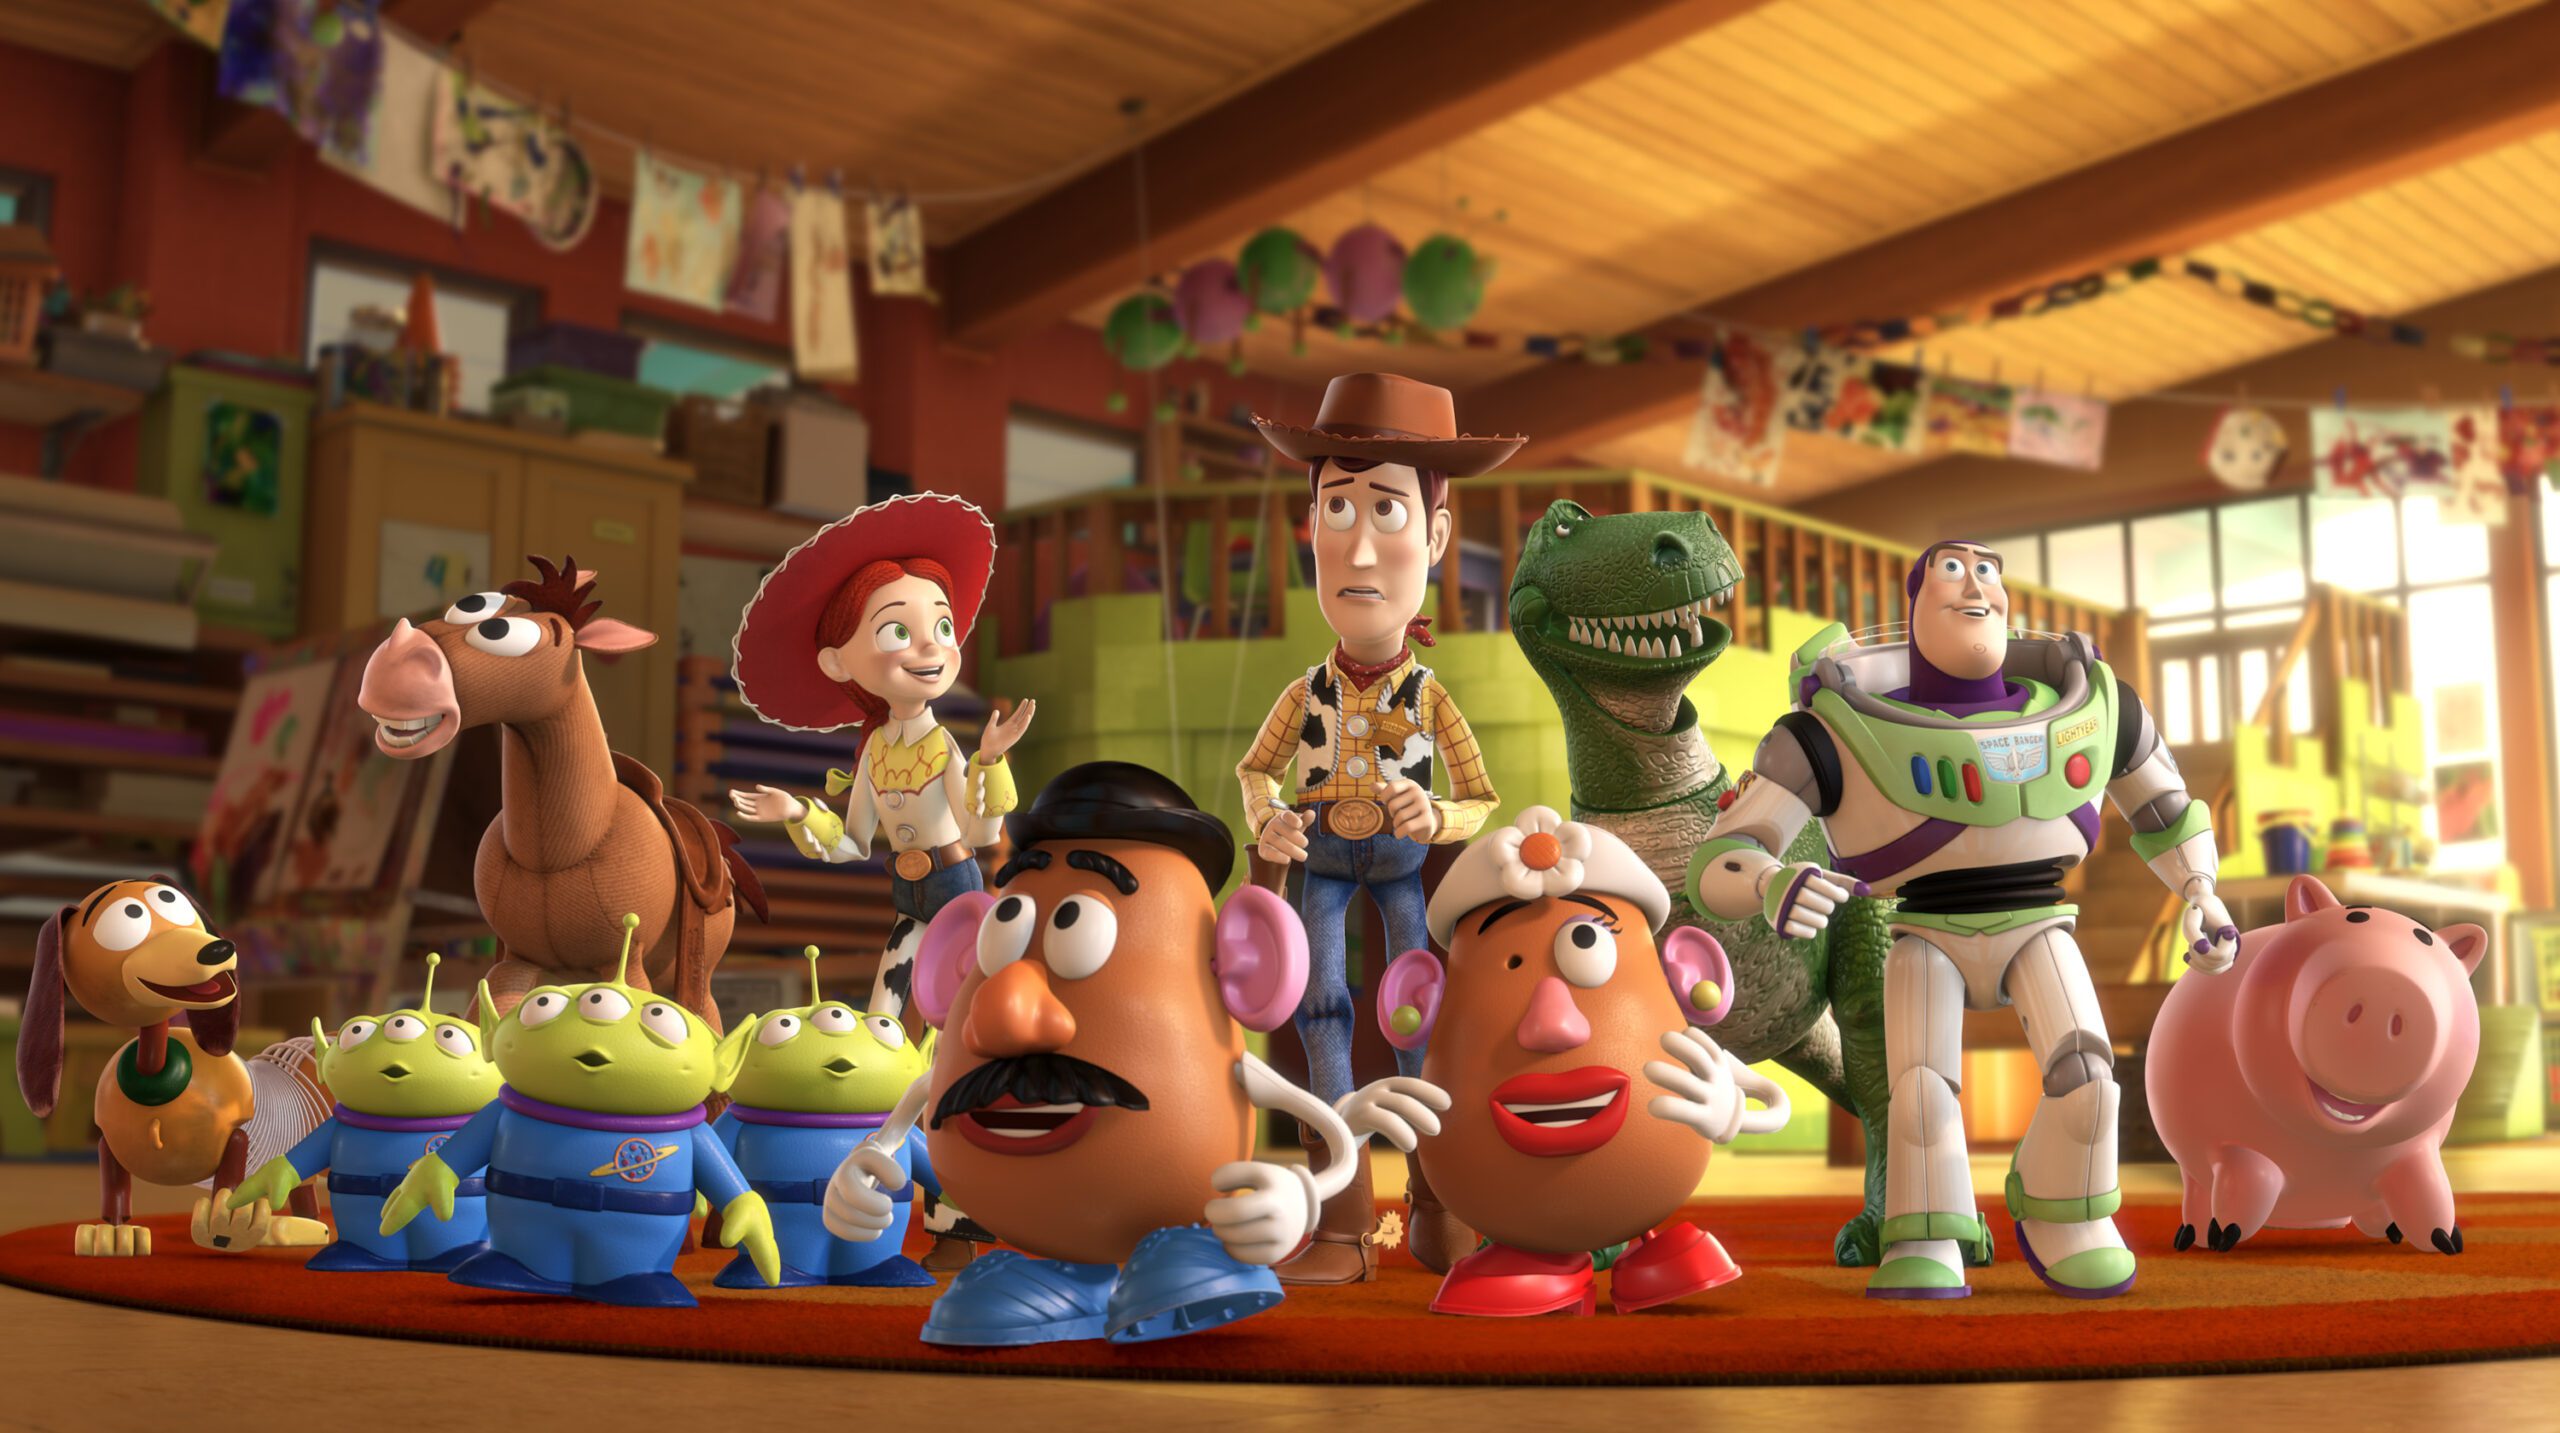 A group of toy story characters, considered one of the best movies, are standing in a room.